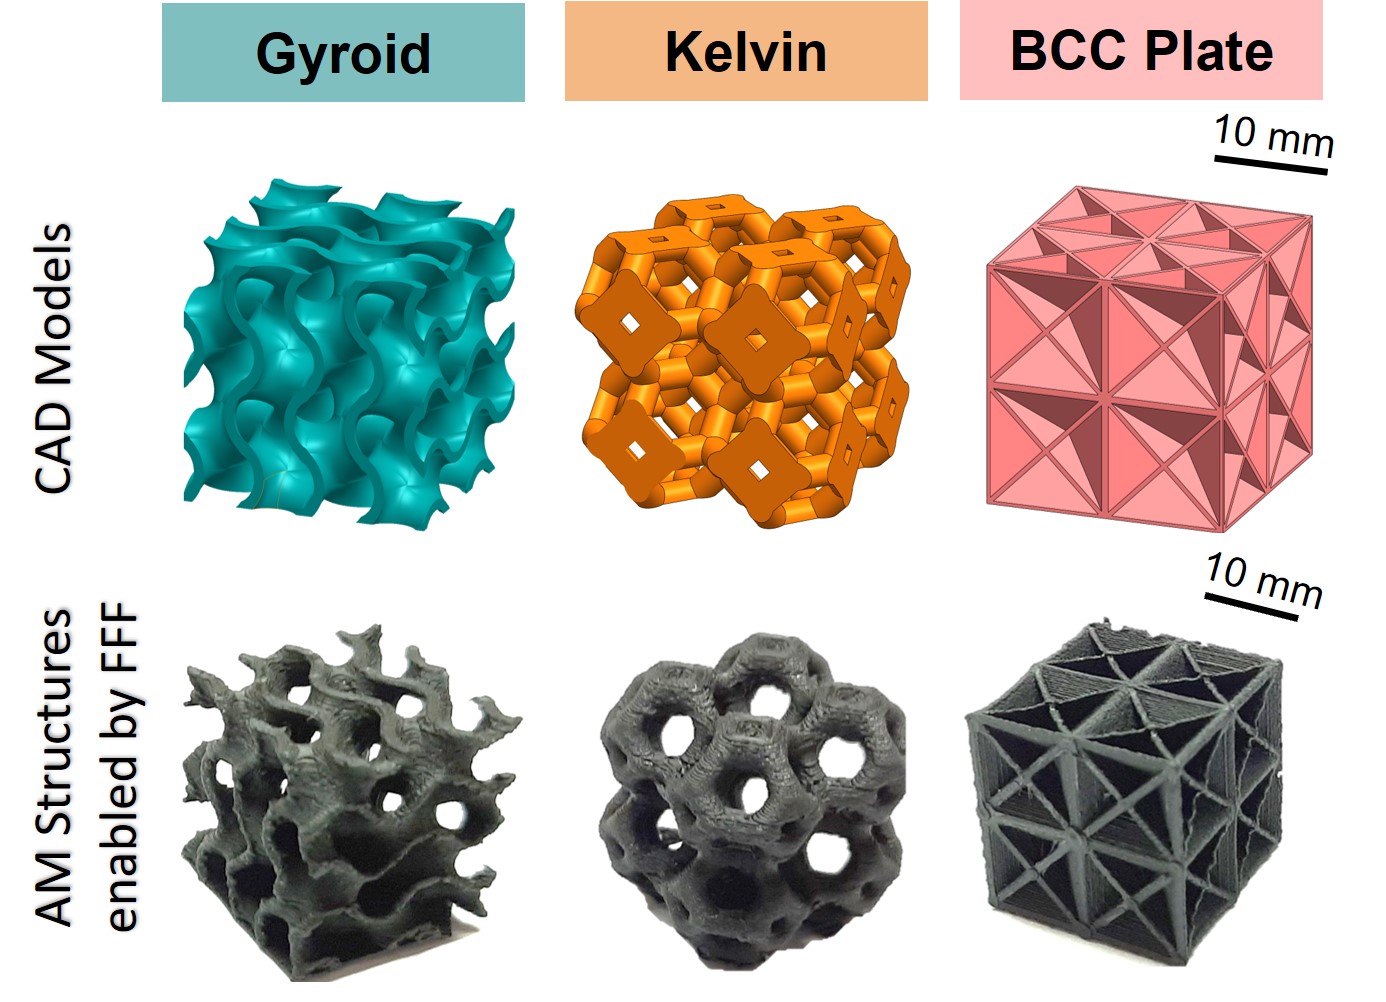 3D printed smart architected material